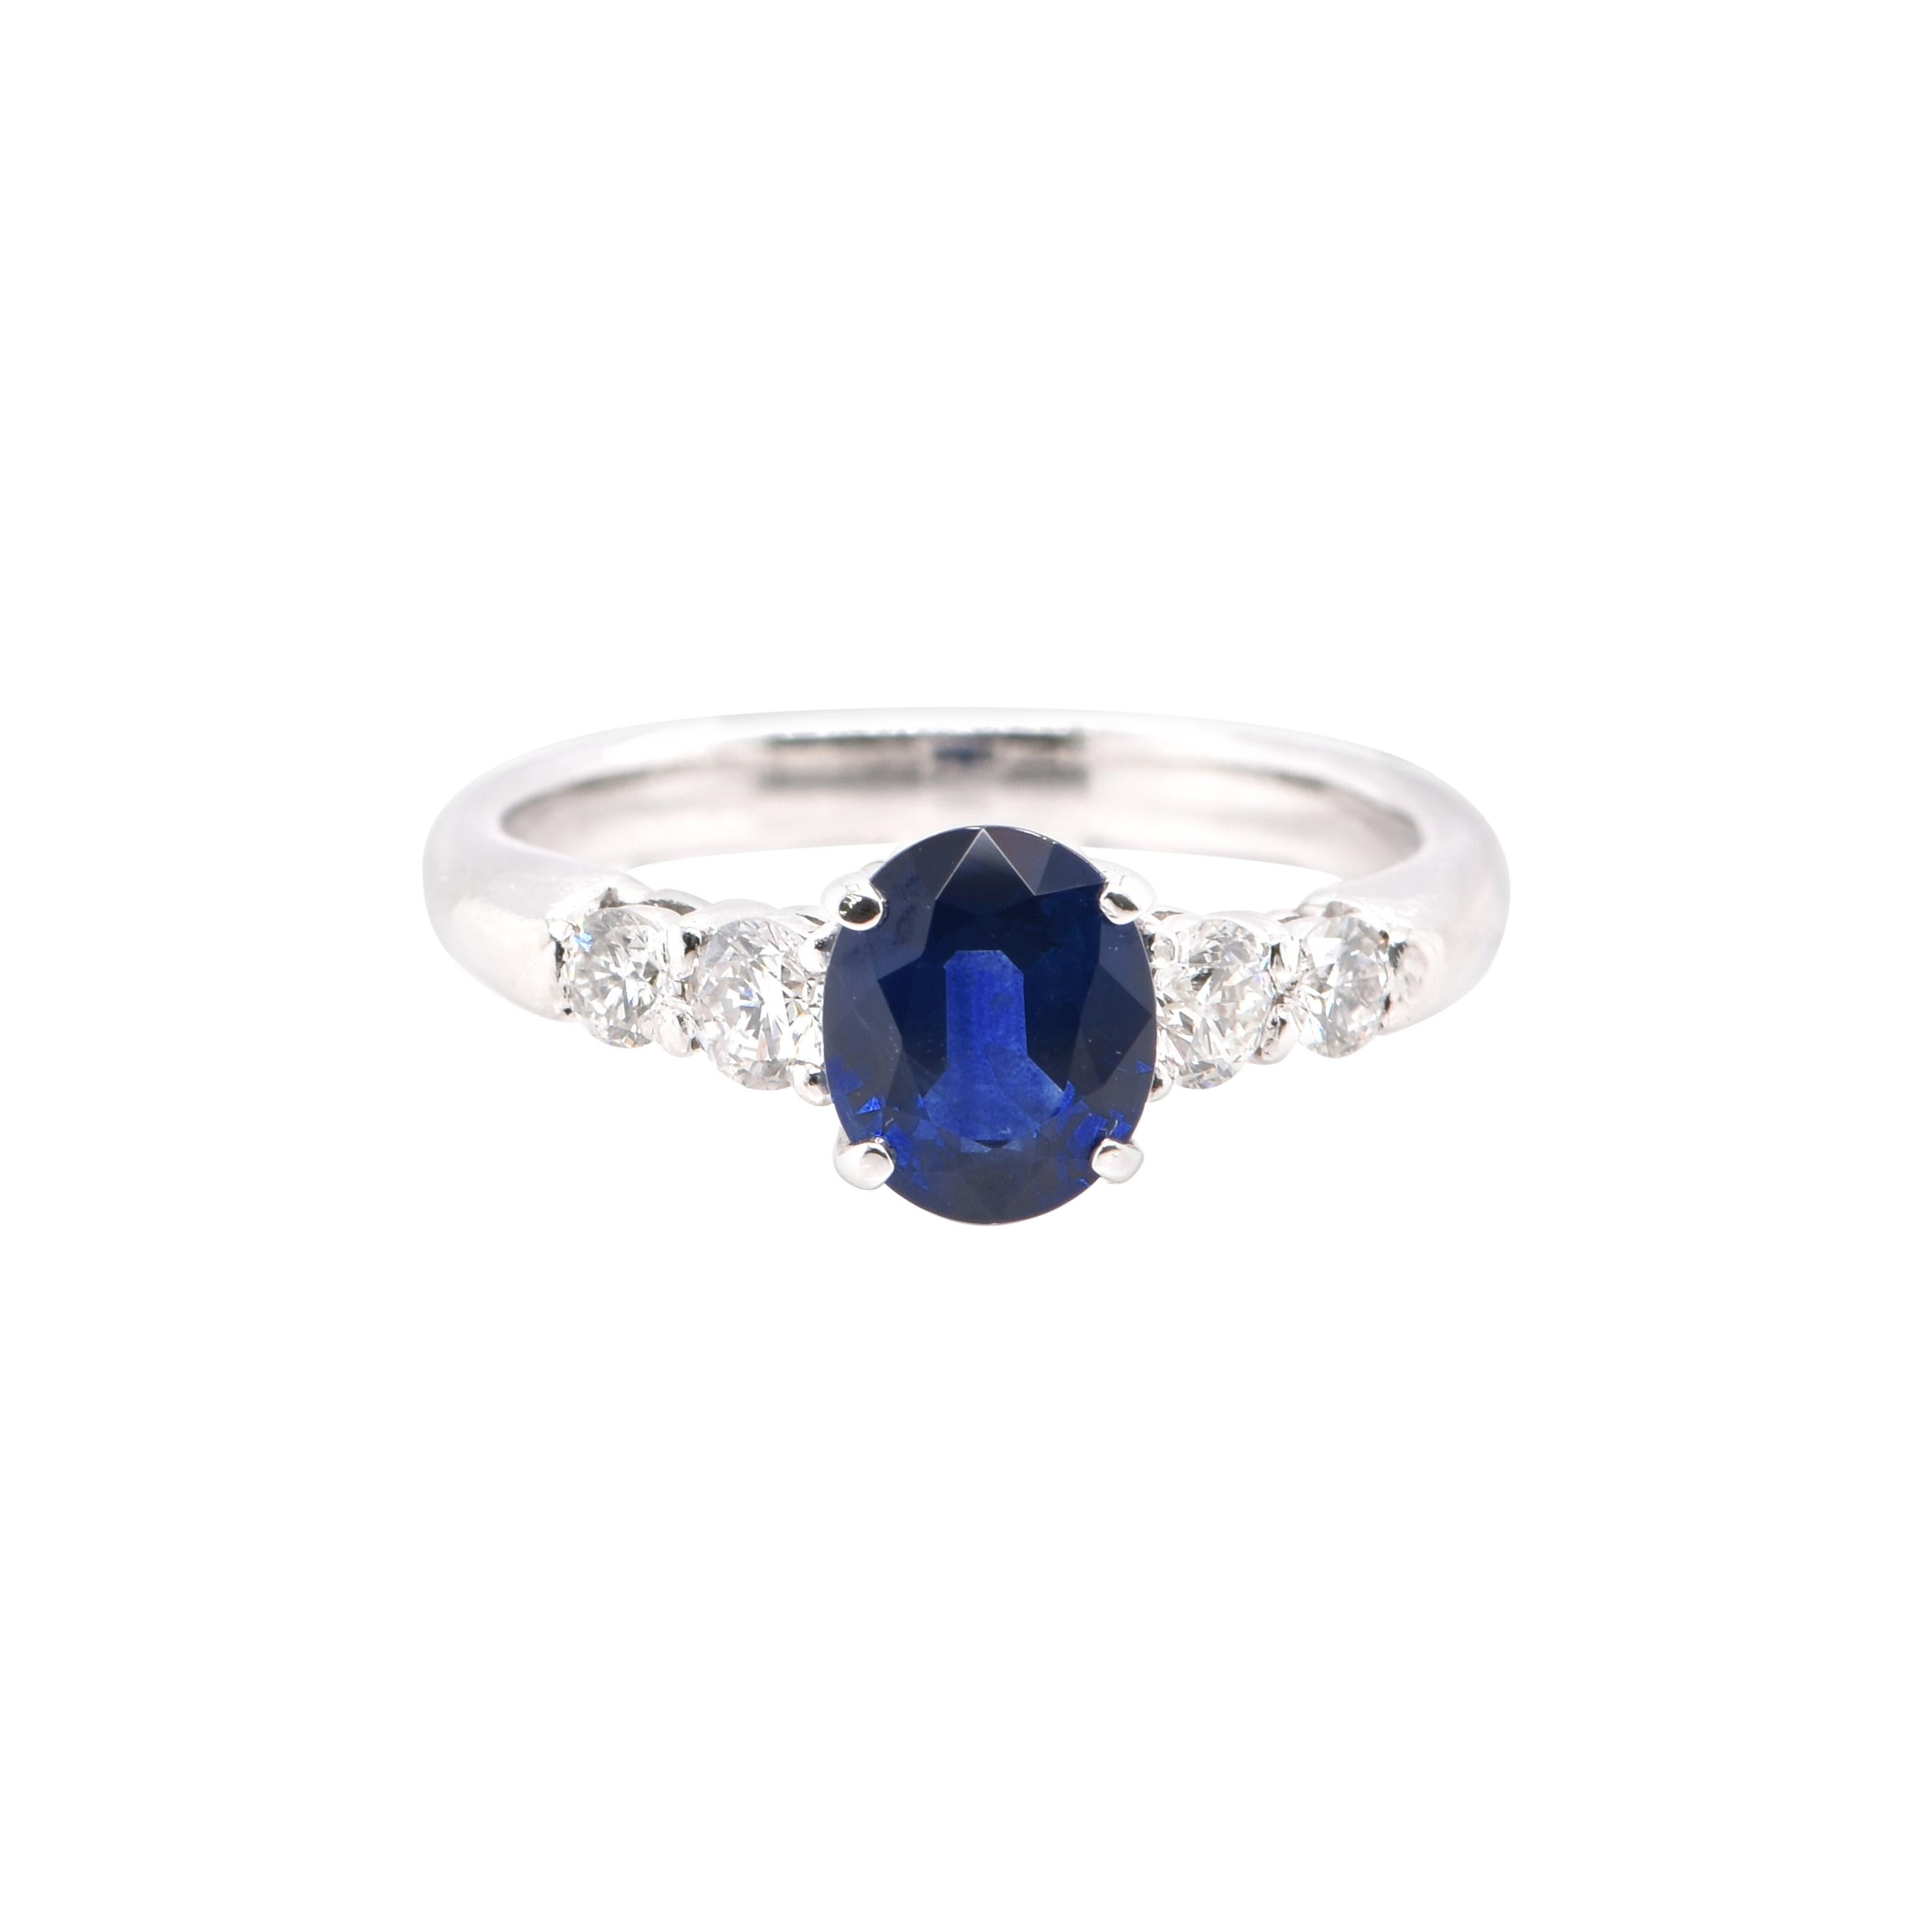 AIGS Certified 1.02 Carat Natural Cornflower Blue Sapphire Ring set in Platinum For Sale